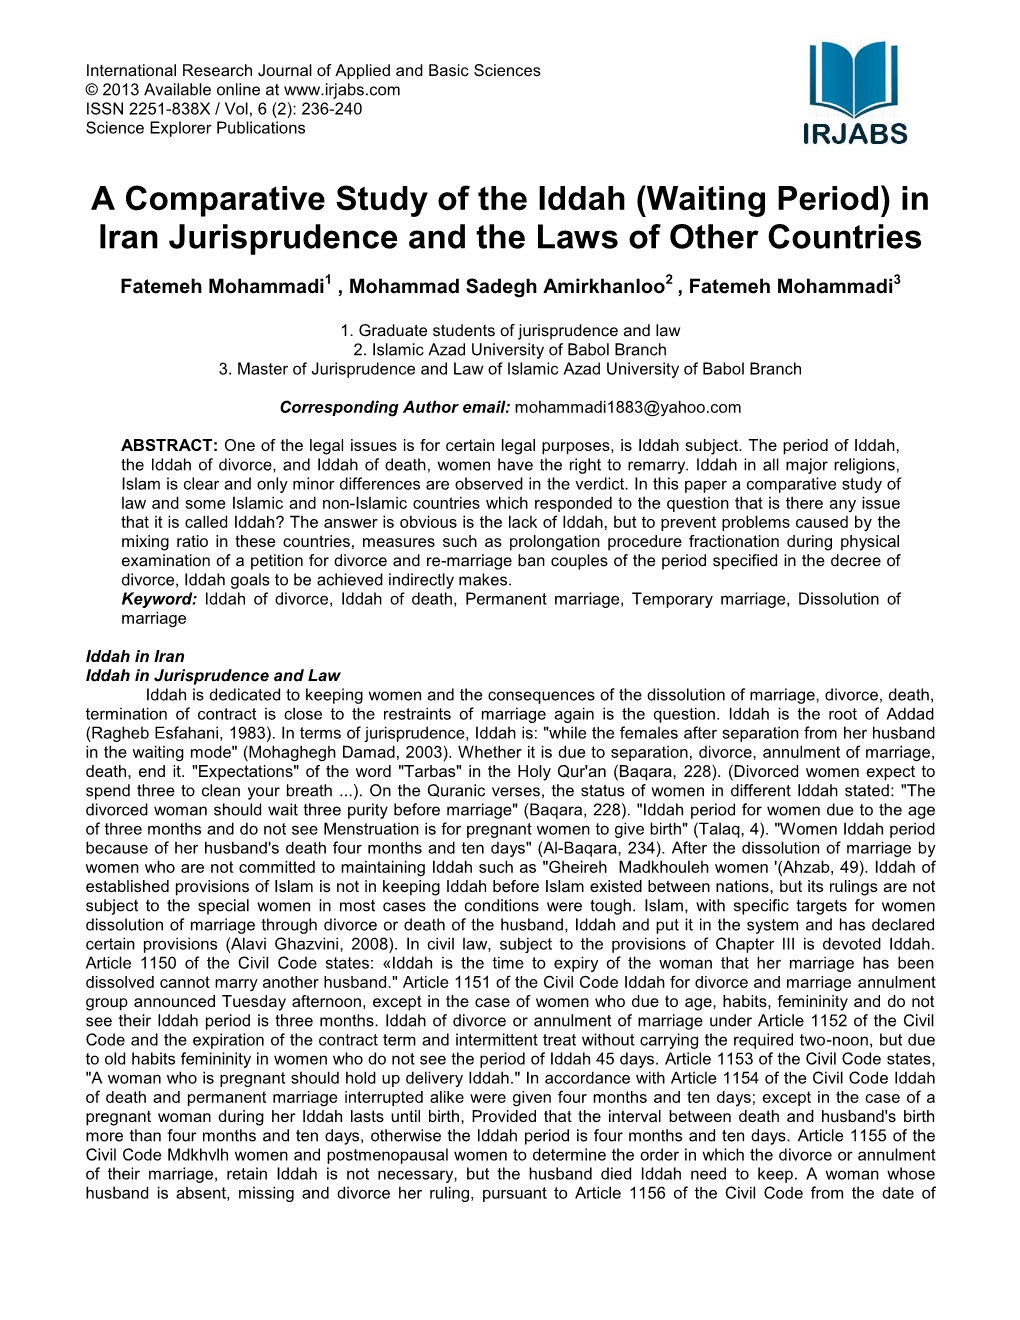 A Comparative Study of the Iddah (Waiting Period) in Iran Jurisprudence and the Laws of Other Countries